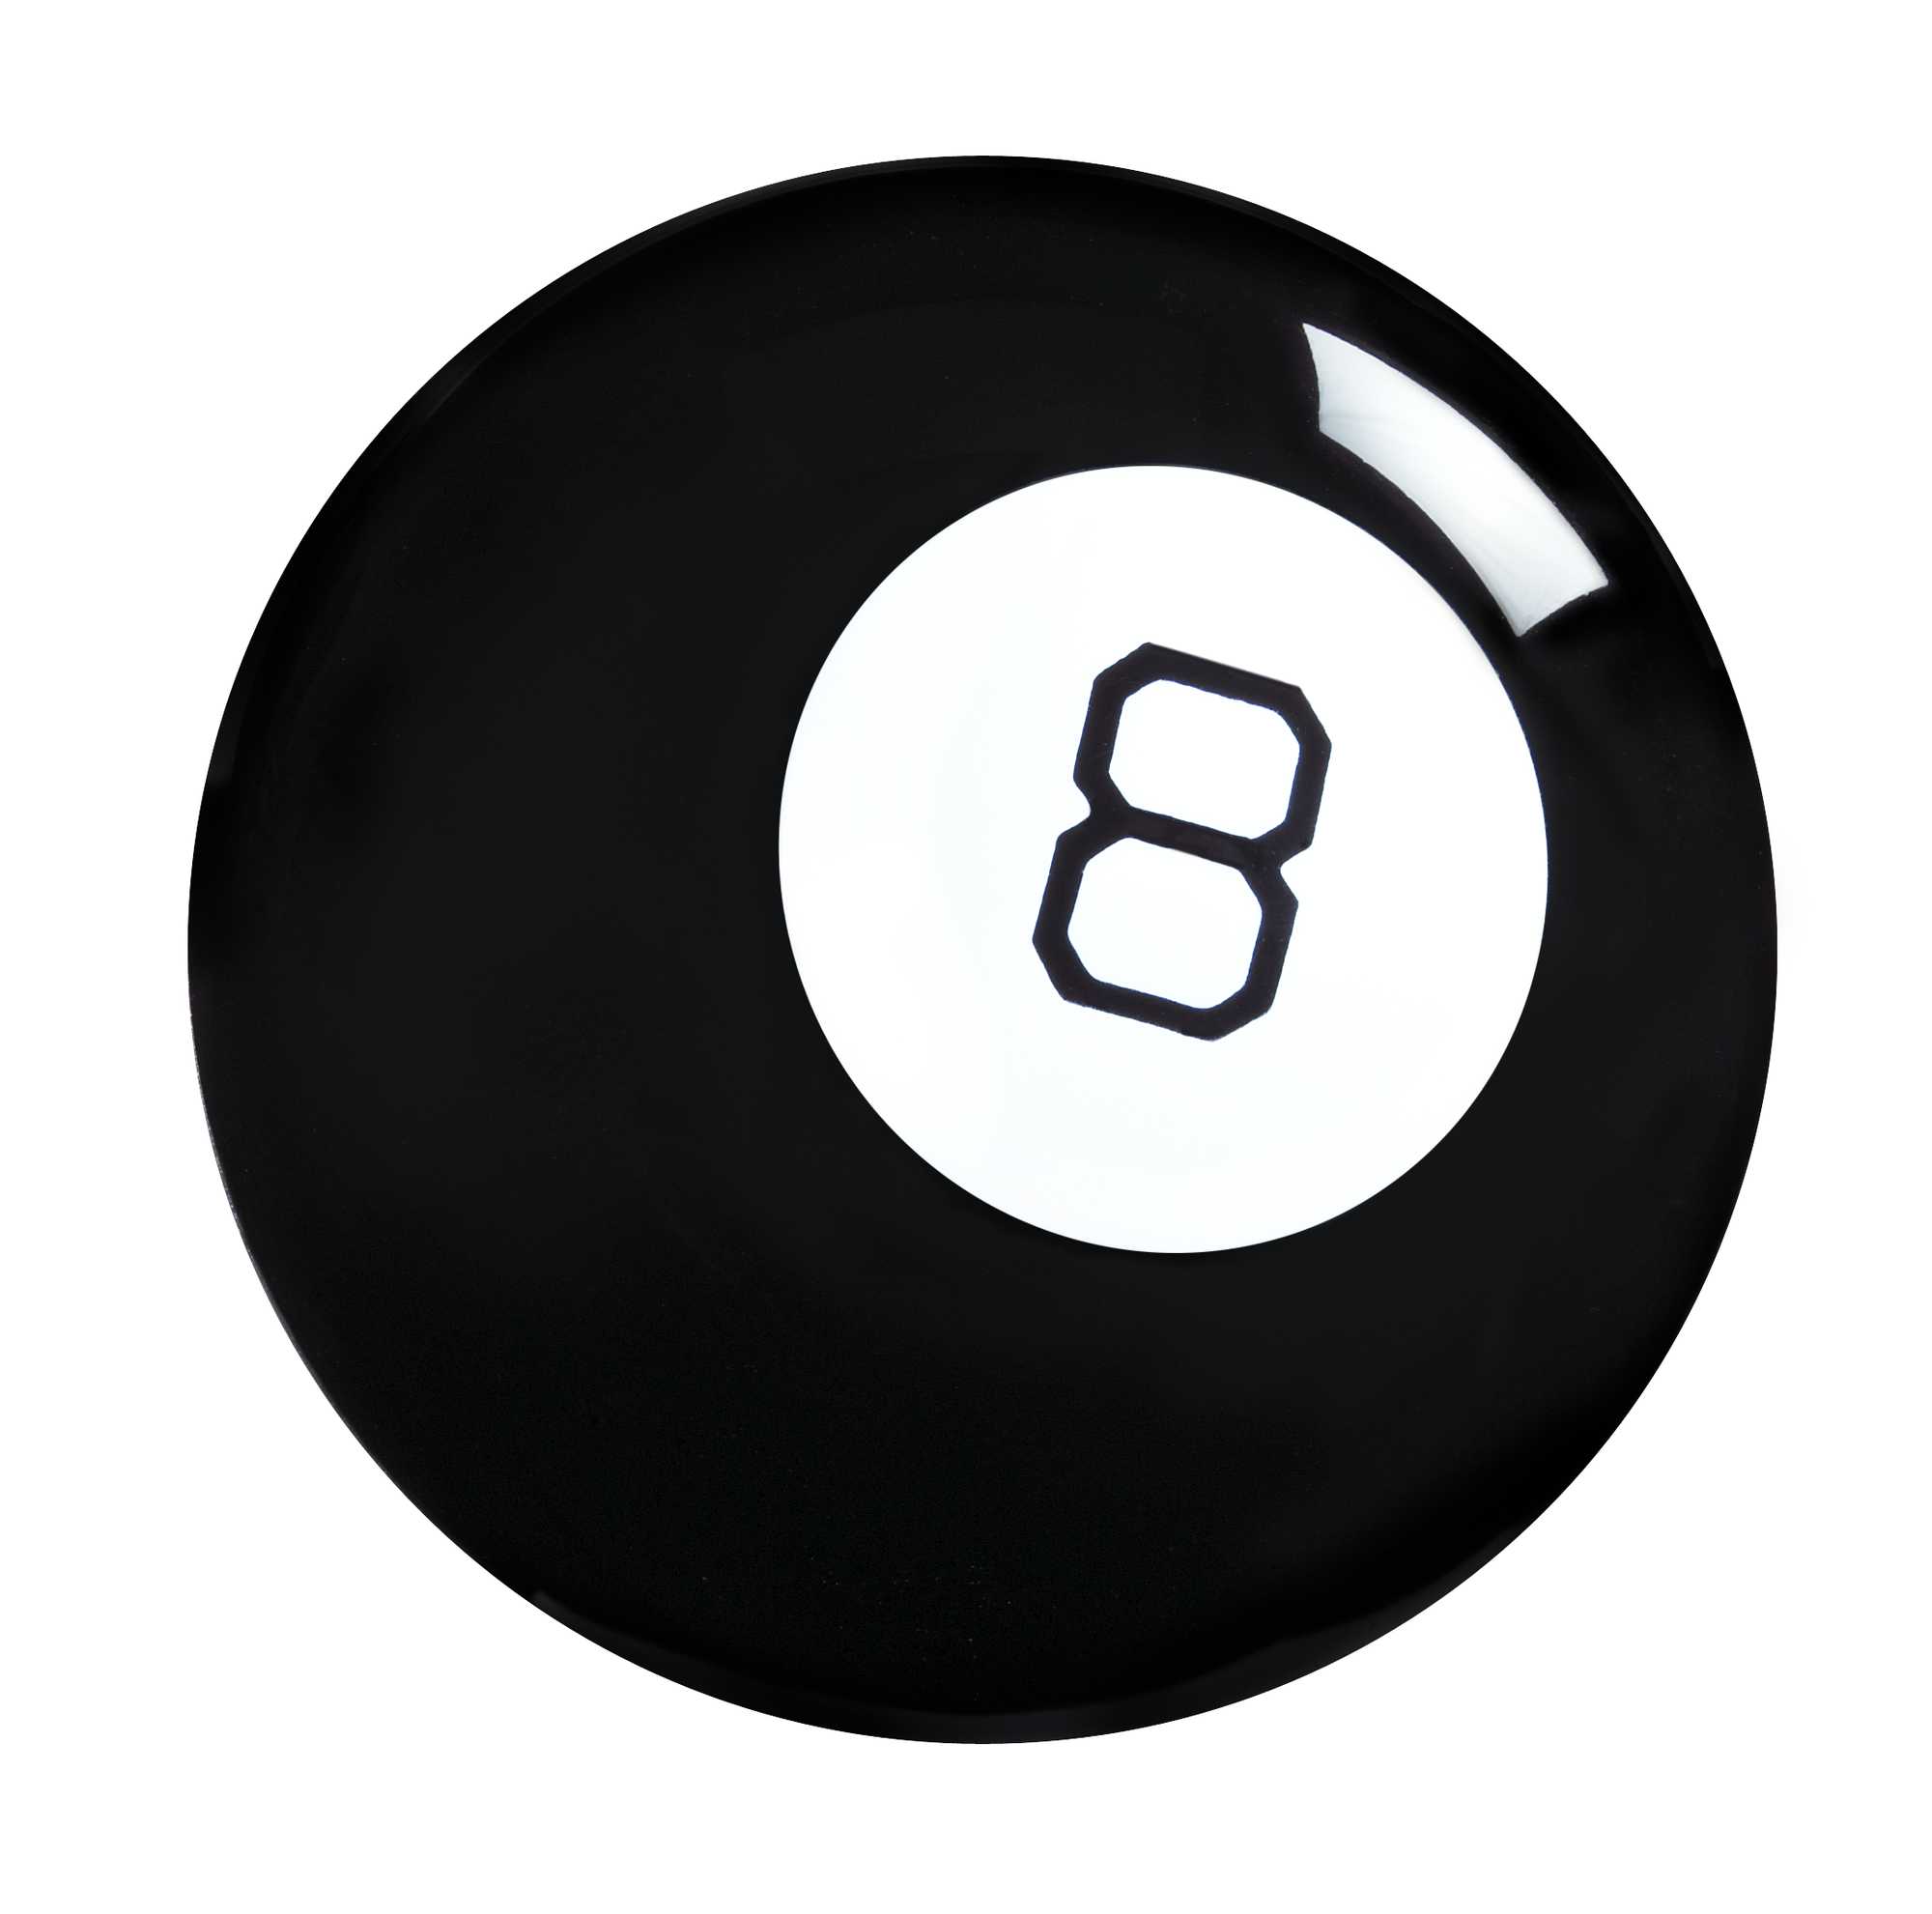 CUSTOM Answers in a Fortune Telling 8 Ball 